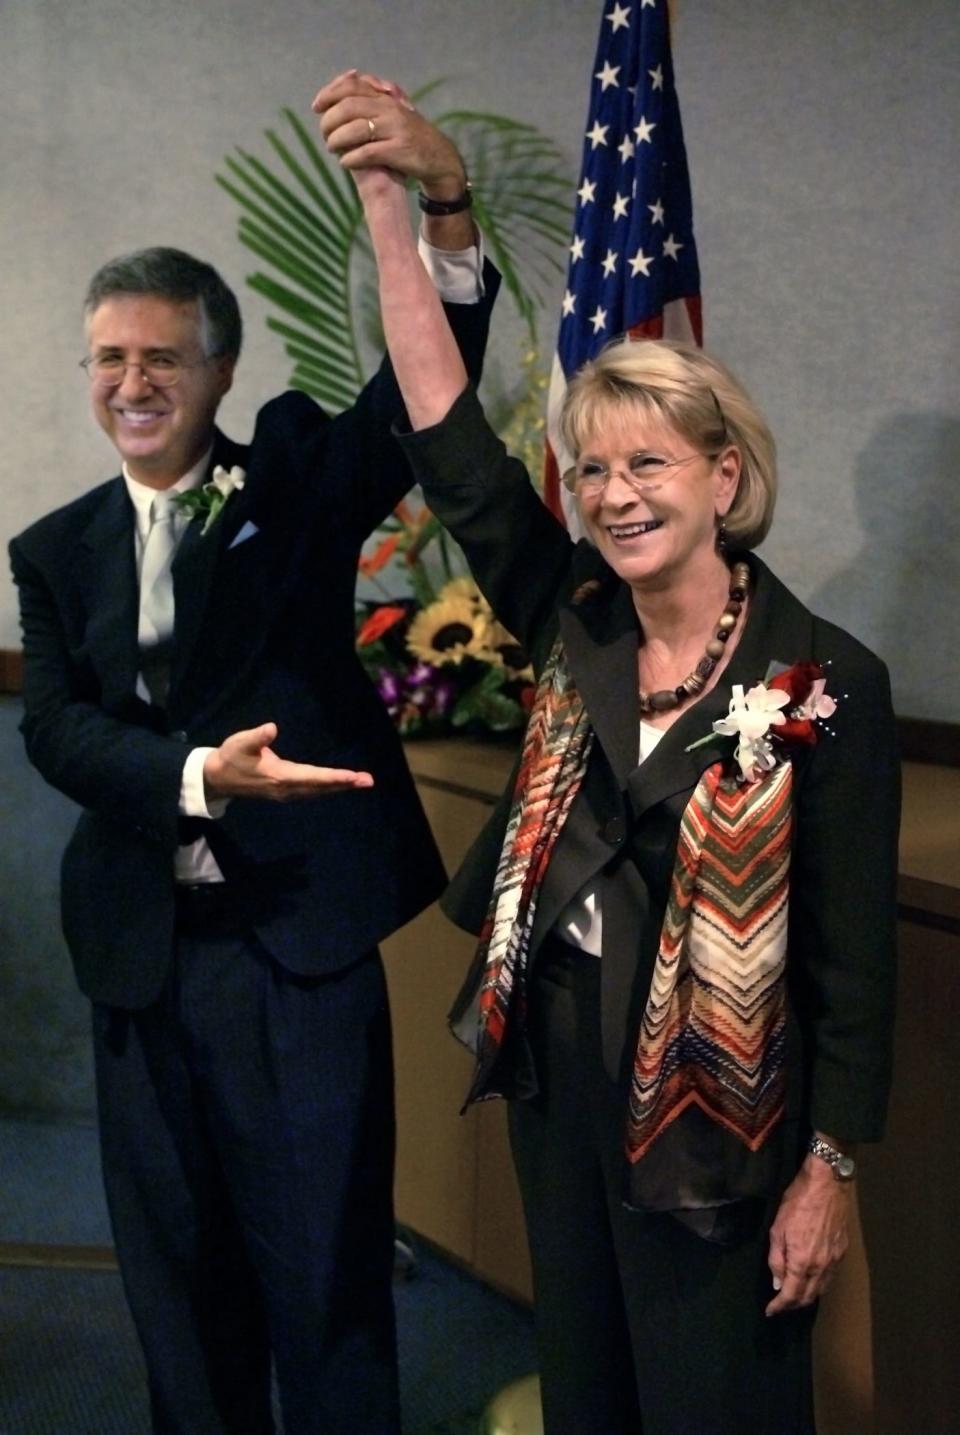 In 2008, outgoing Boca Raton mayor Steven L. Abrams acknowledges his successor Susan Whelchel after swearing her into office.